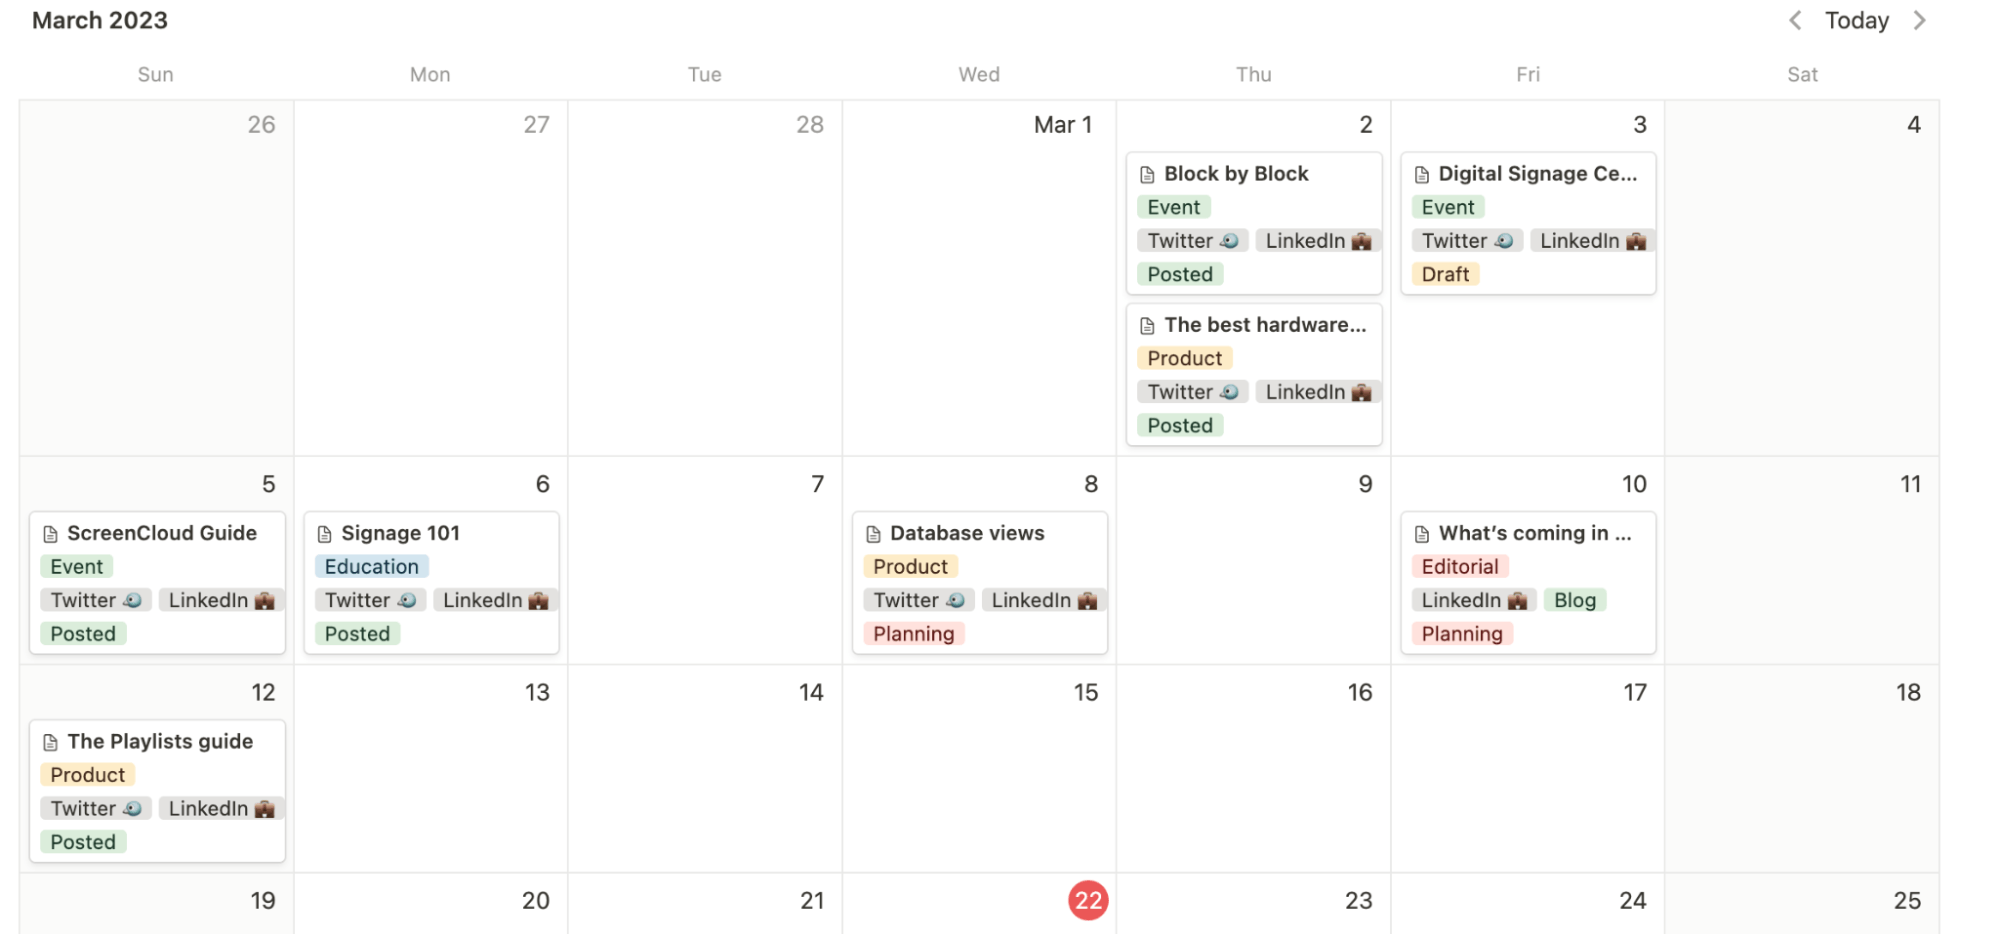 A Notion Calendar view might not be readable at a glance—but it does show progress